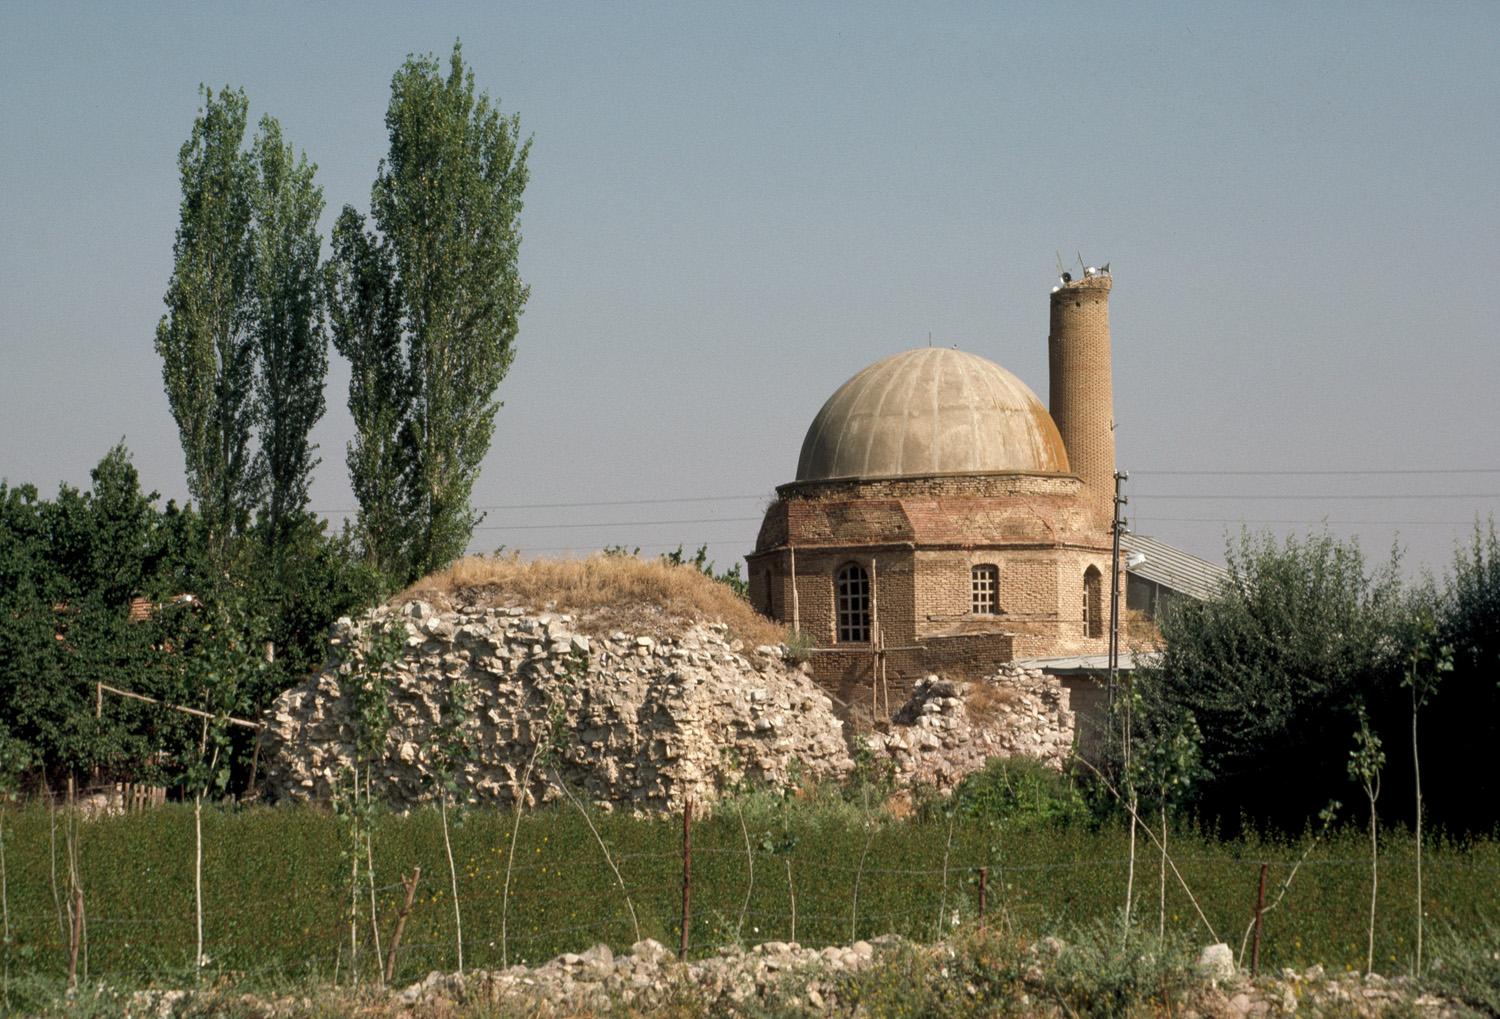 Exterior view from south, showing sanctuary dome and minaret